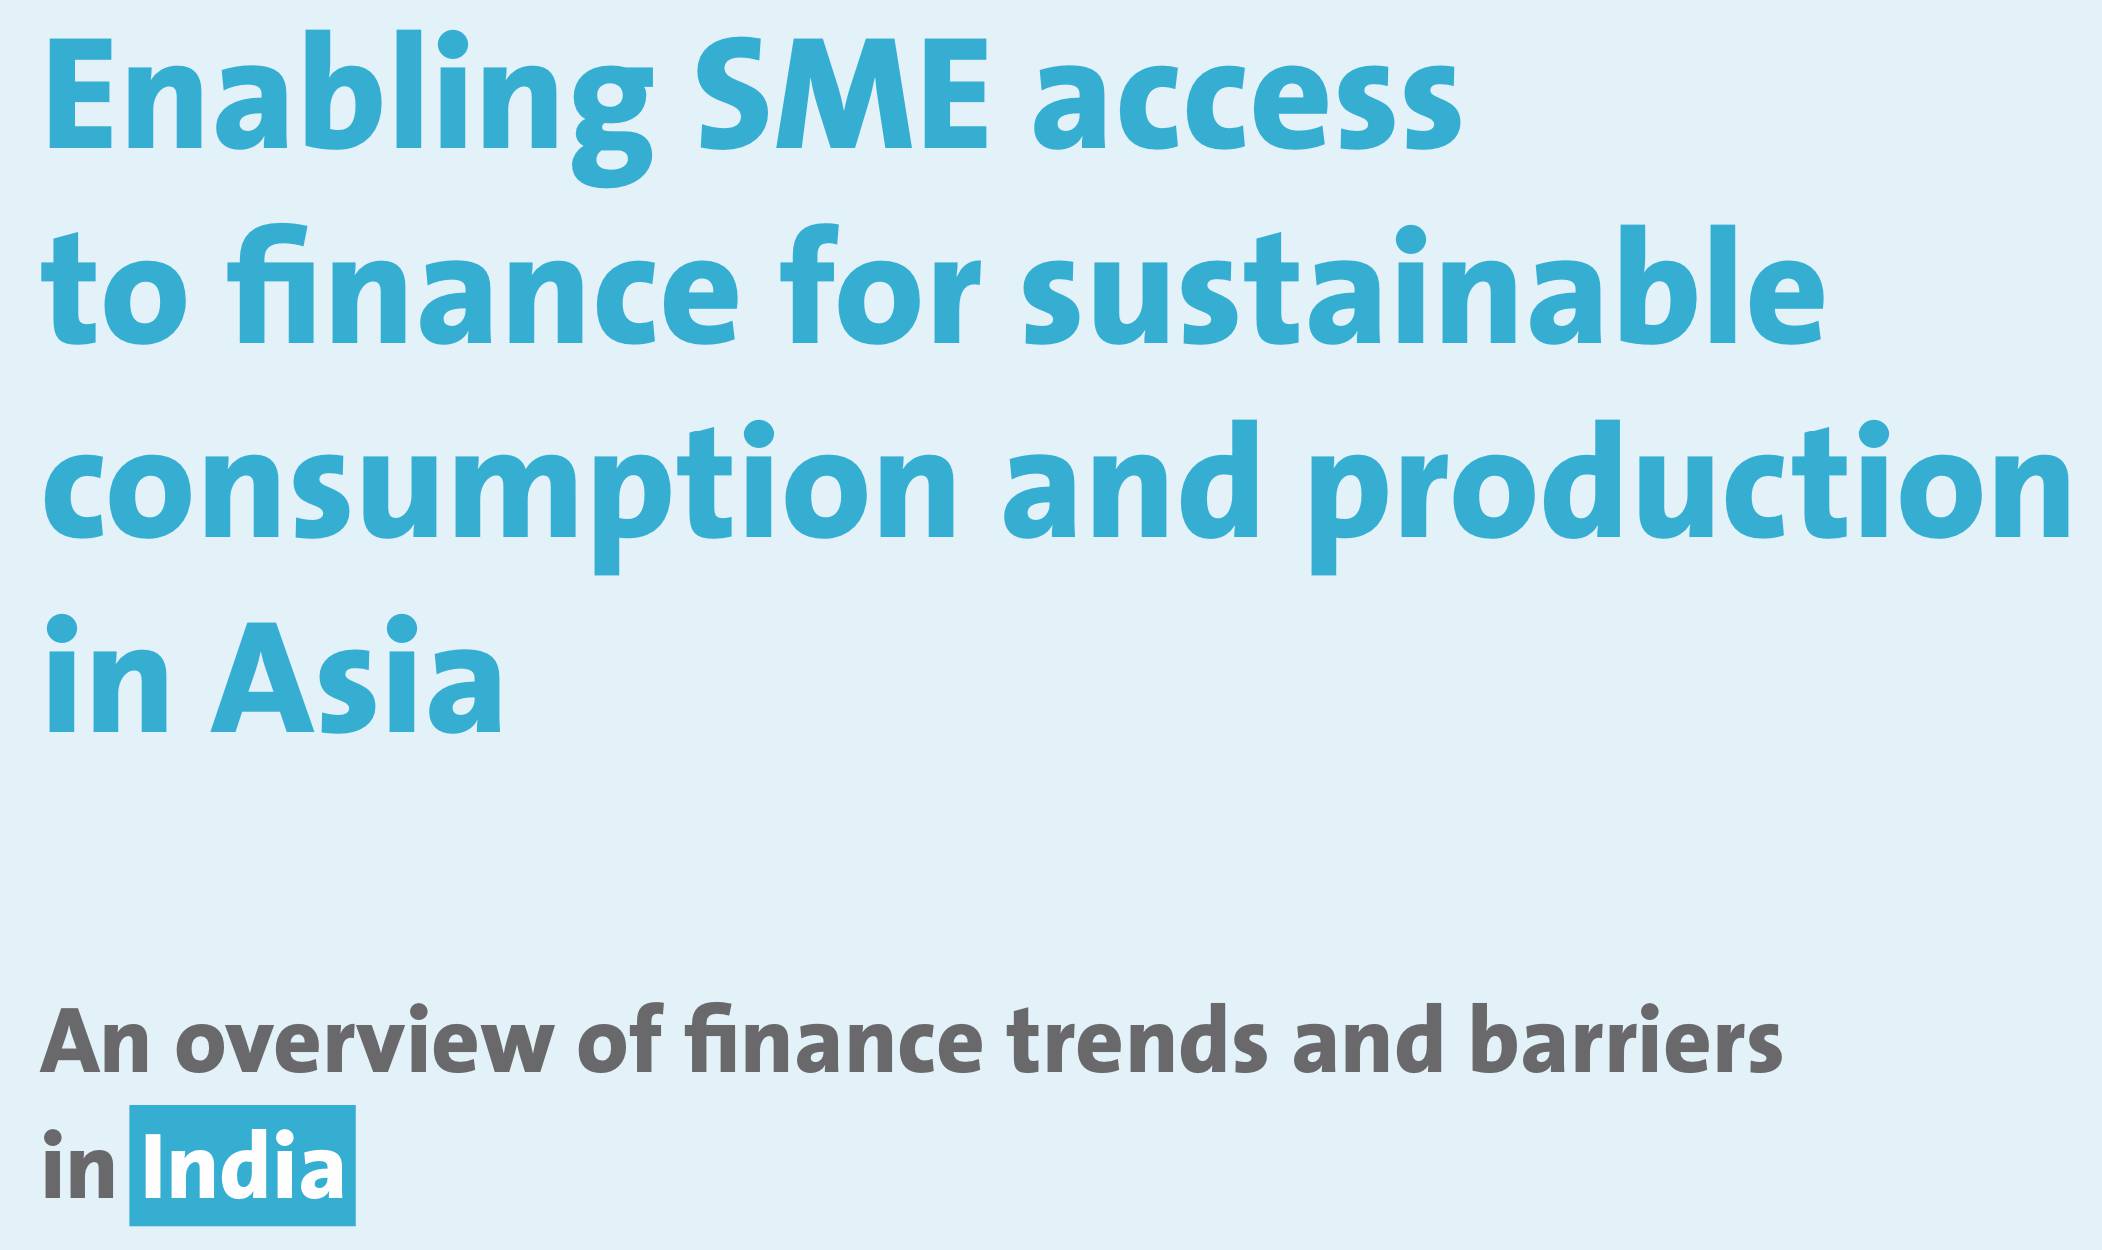 Enabling SME access to finance for sustainable consumption and production in Asia: An overview of finance trends and barriers in India